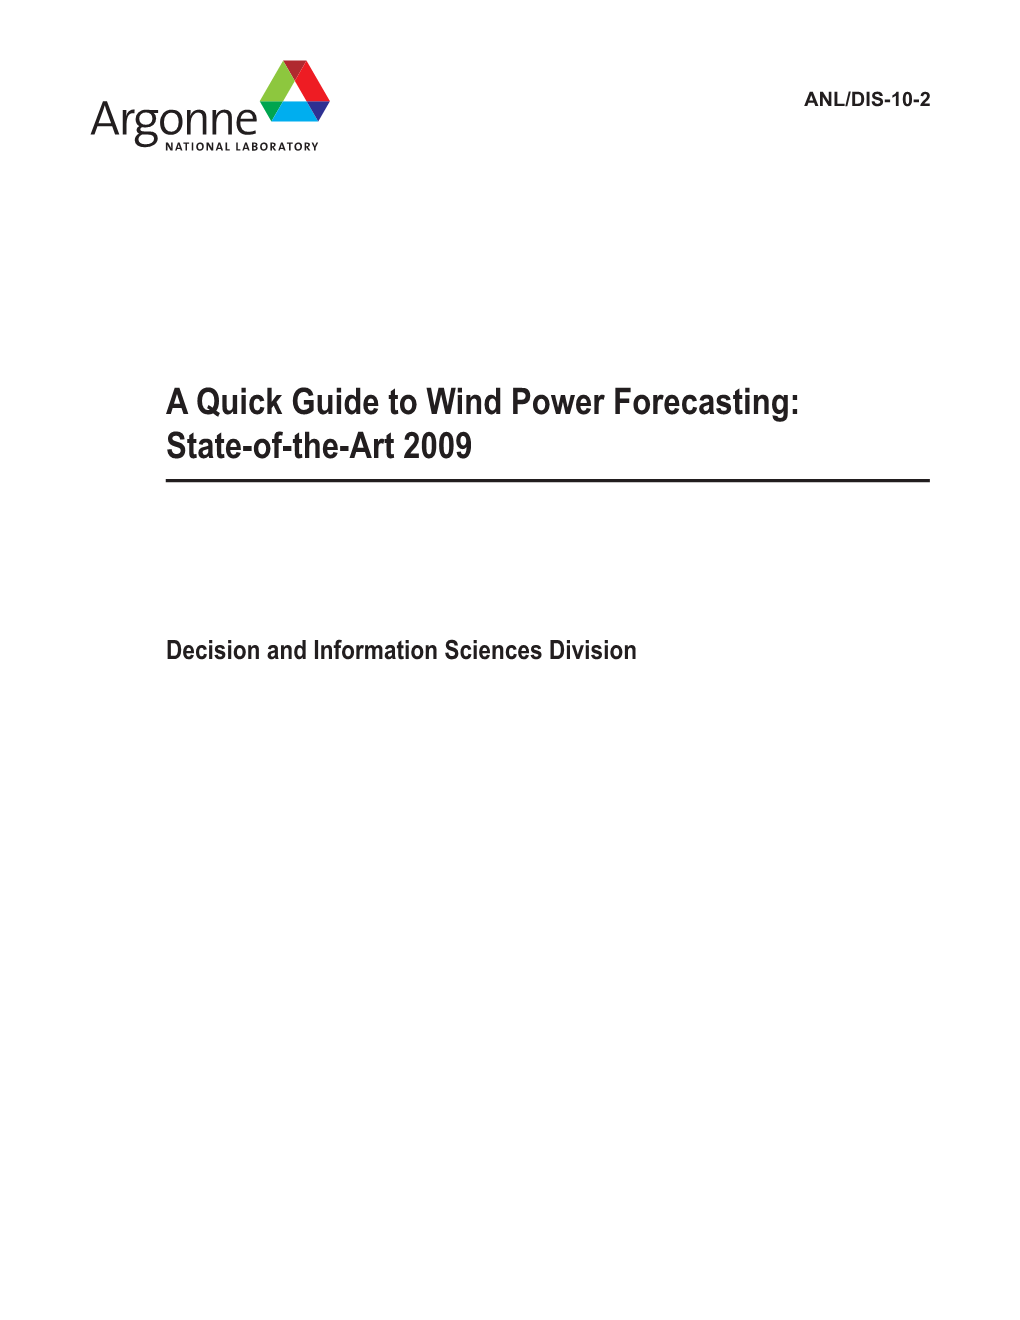 A Quick Guide to Wind Power Forecasting: State-Of-The-Art 2009